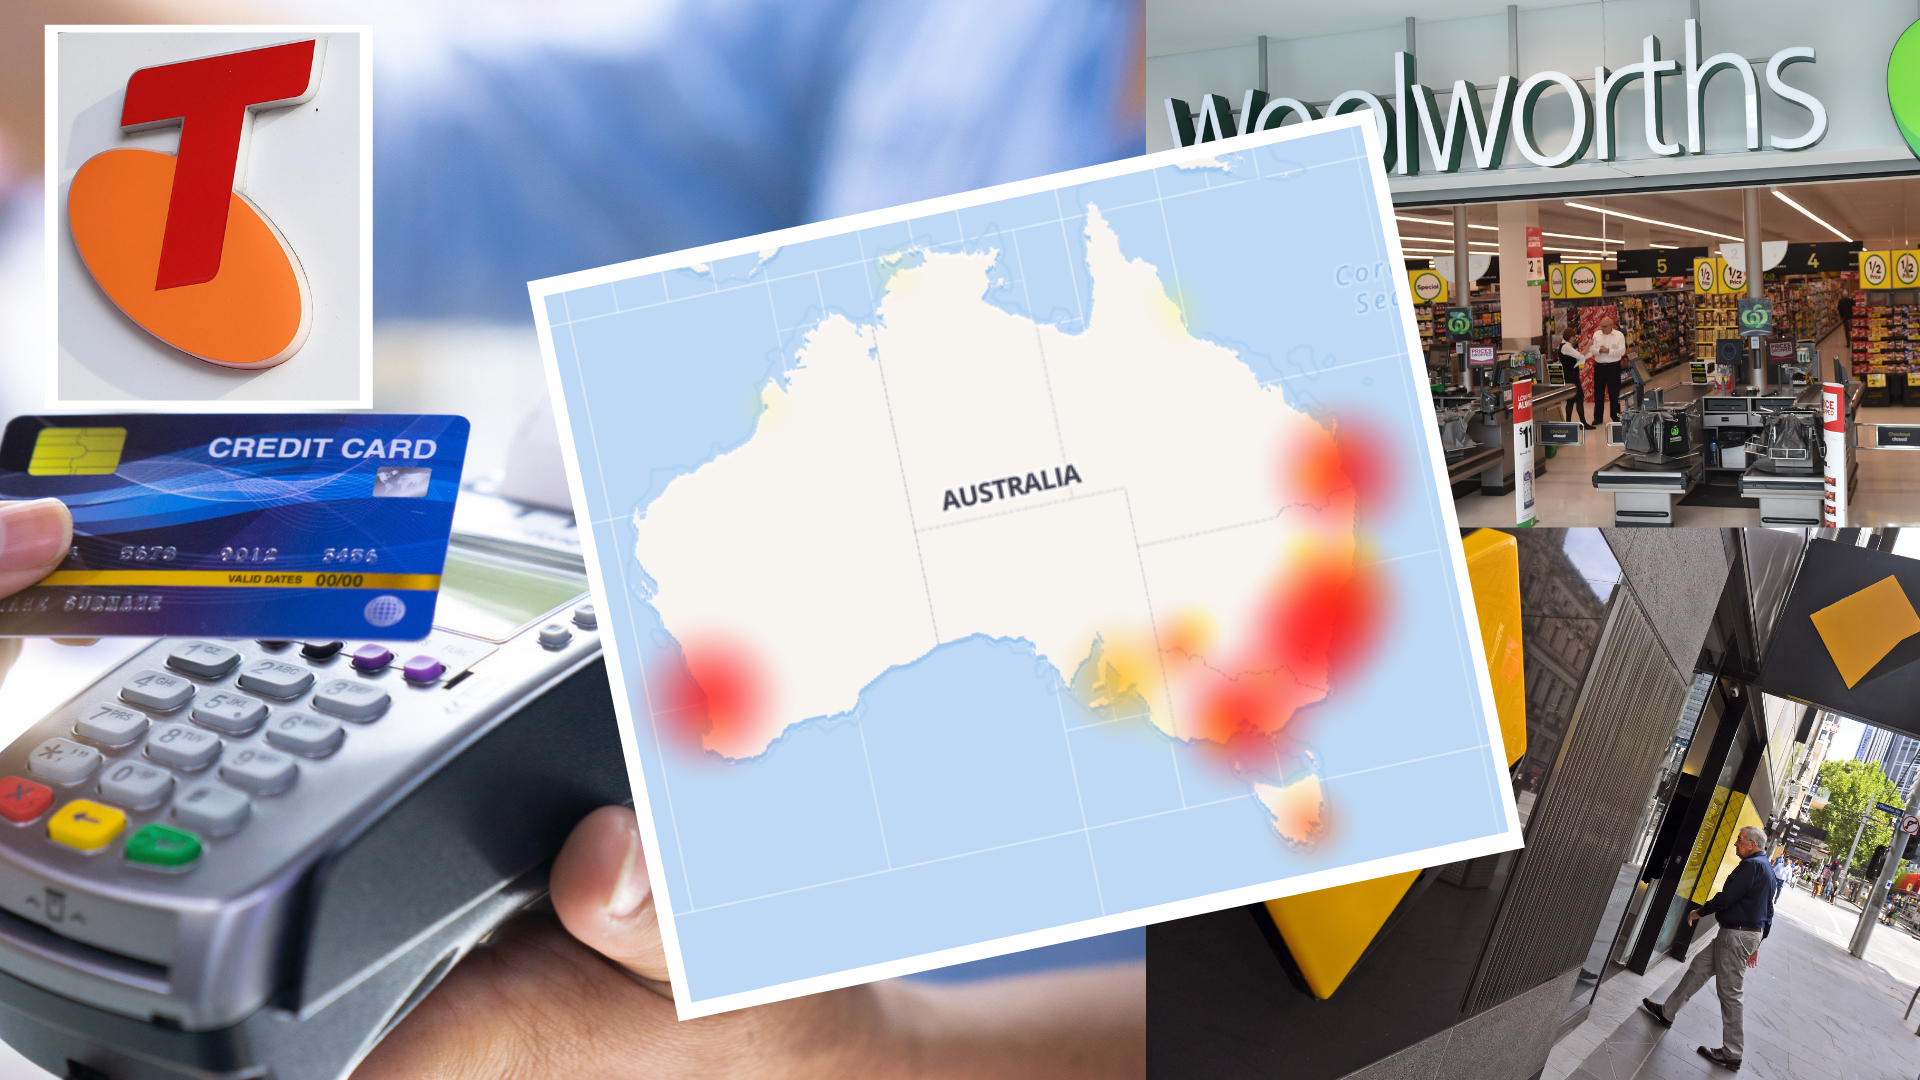 EFTPOS outage hits Woolworths, Commonwealth Bank